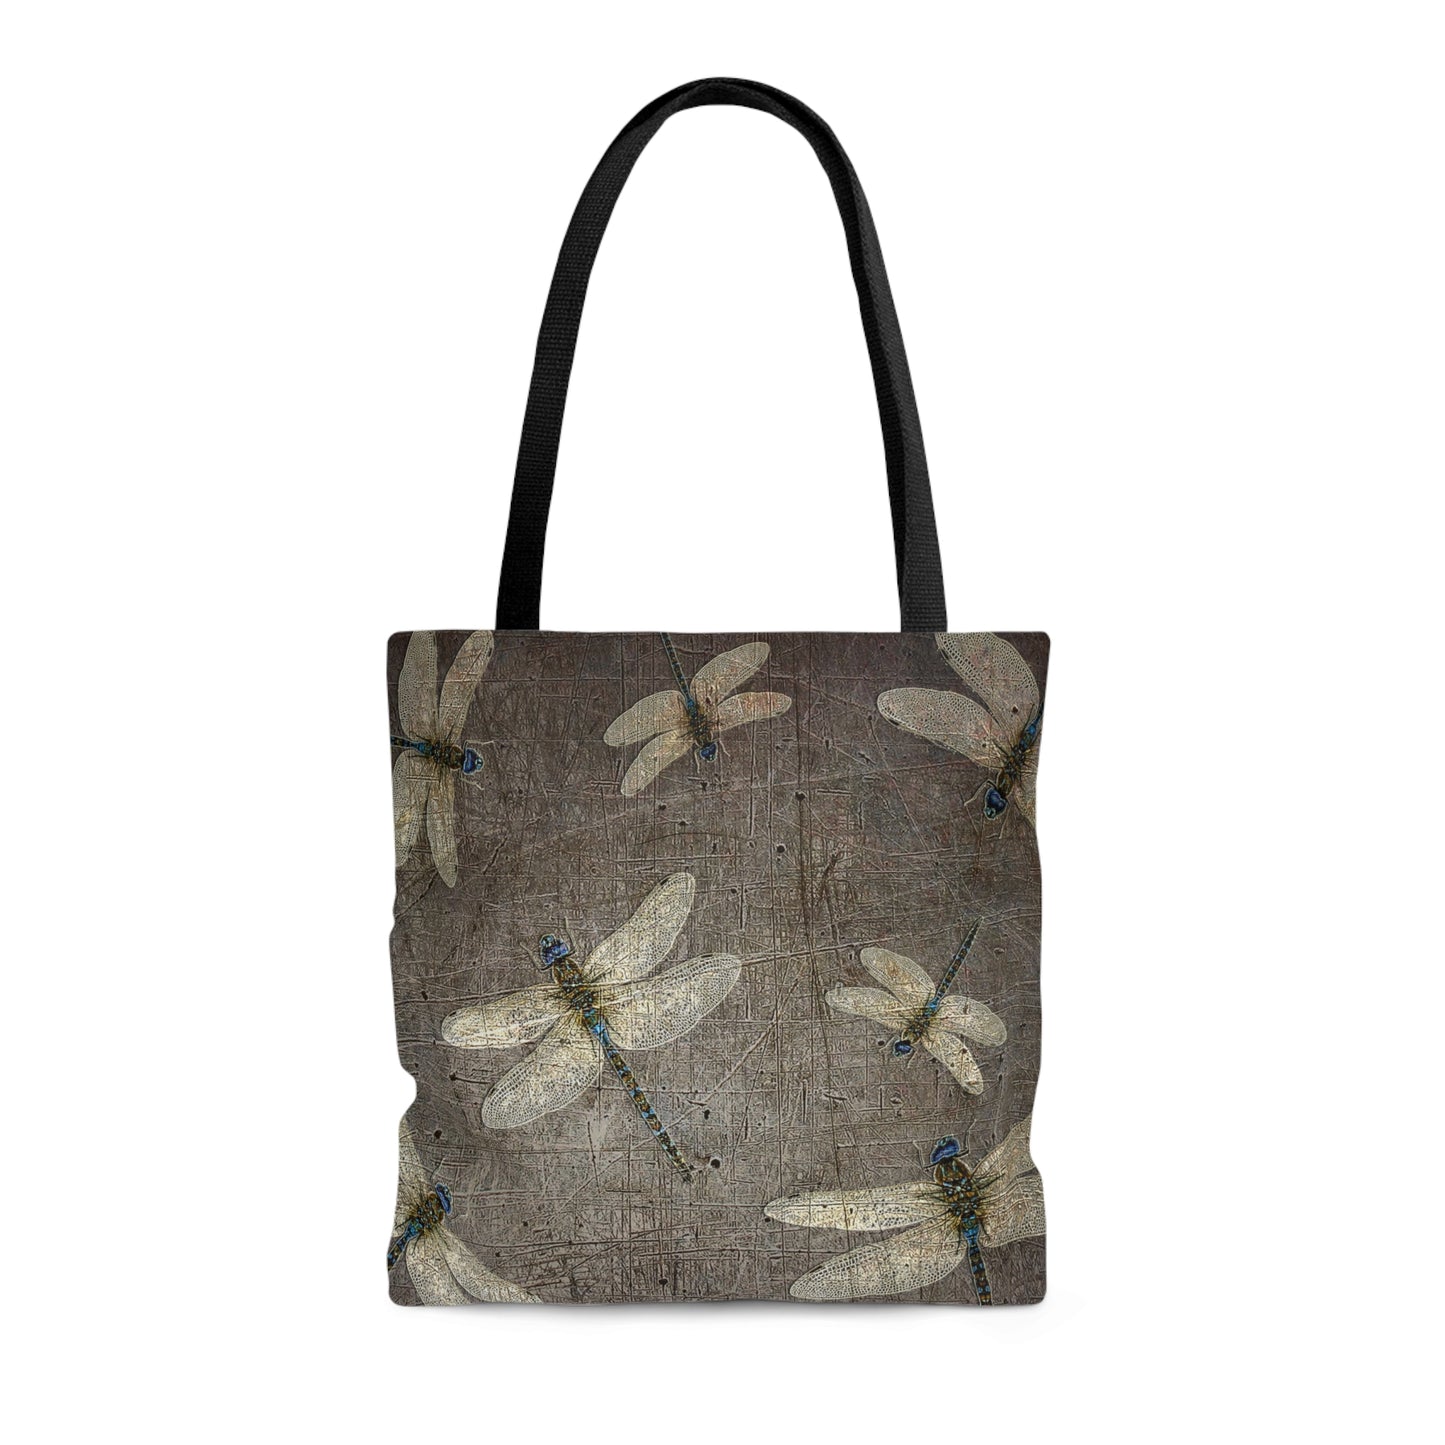 Flight of Dragonflies on Distressed Gray Stone Printed on Tote Bag medium front